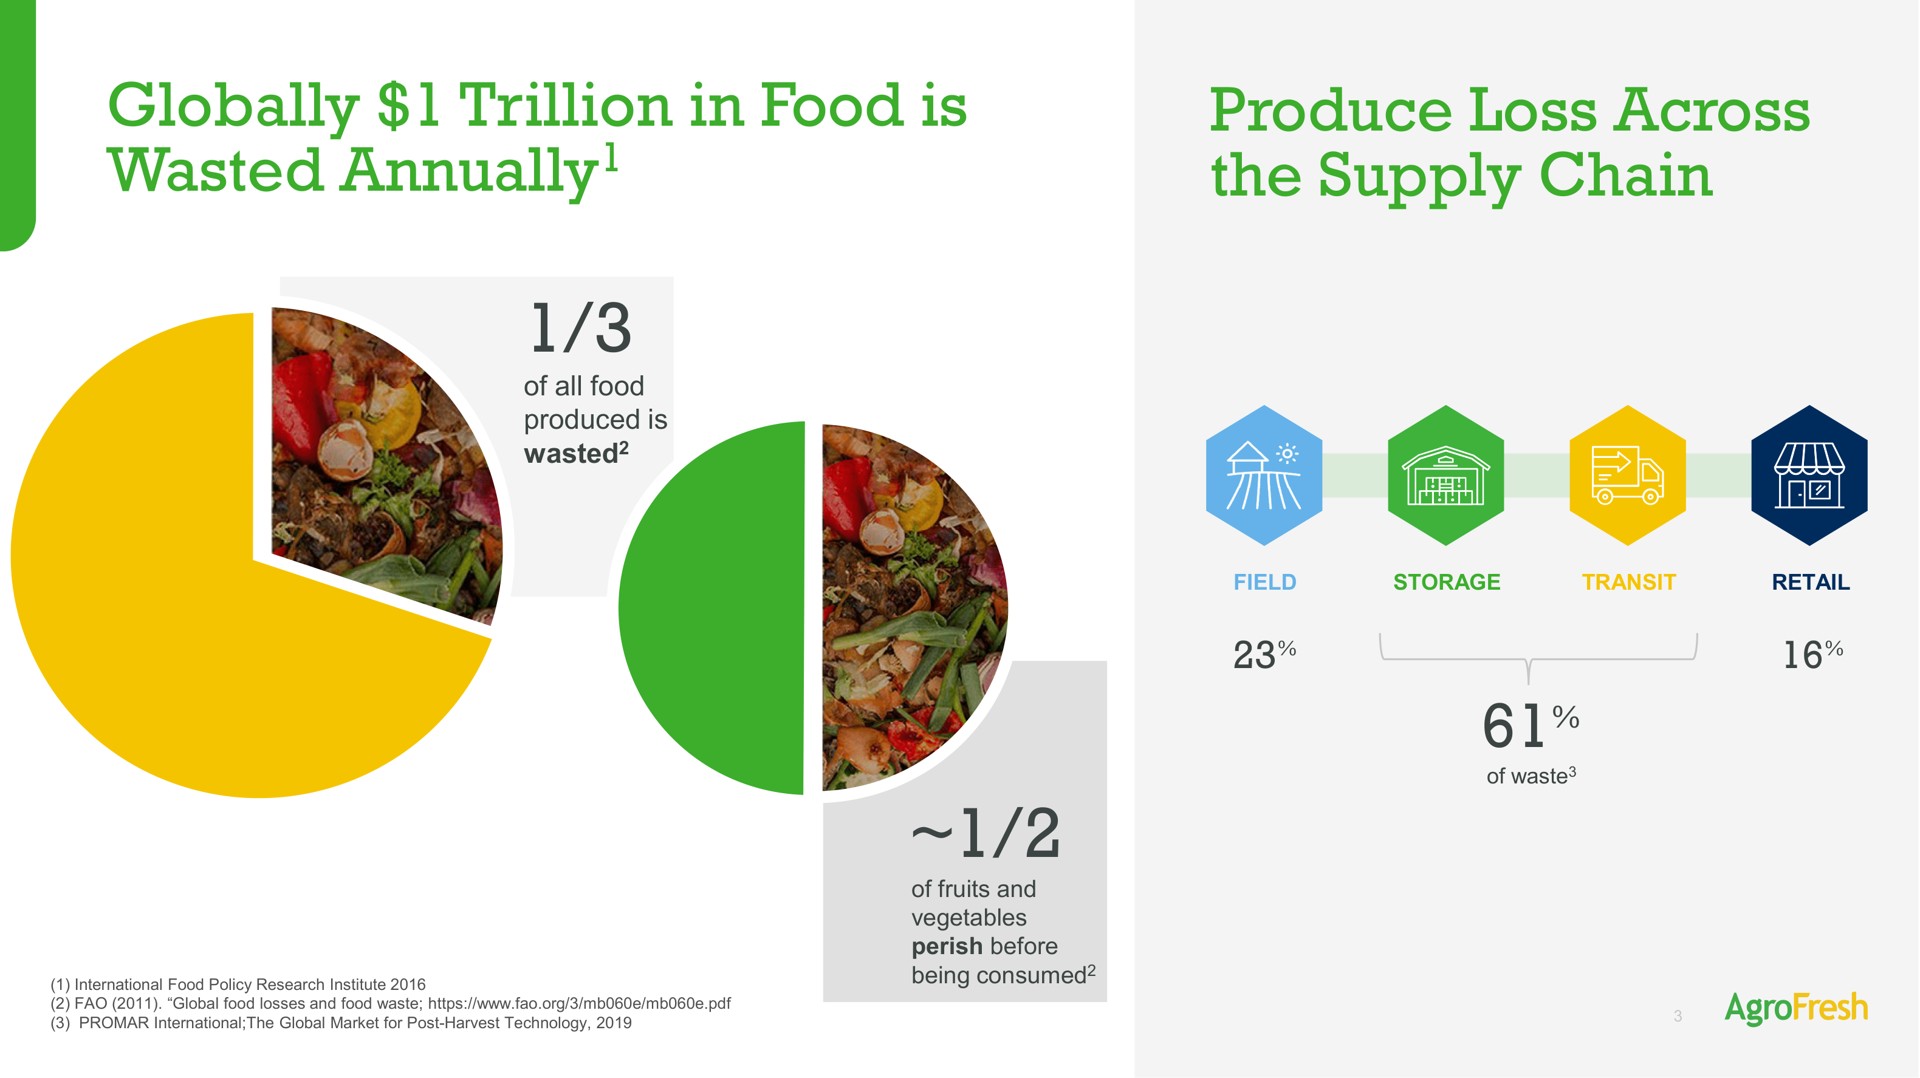 globally trillion in food is wasted annually produce loss across the supply chain annually | AgroFresh